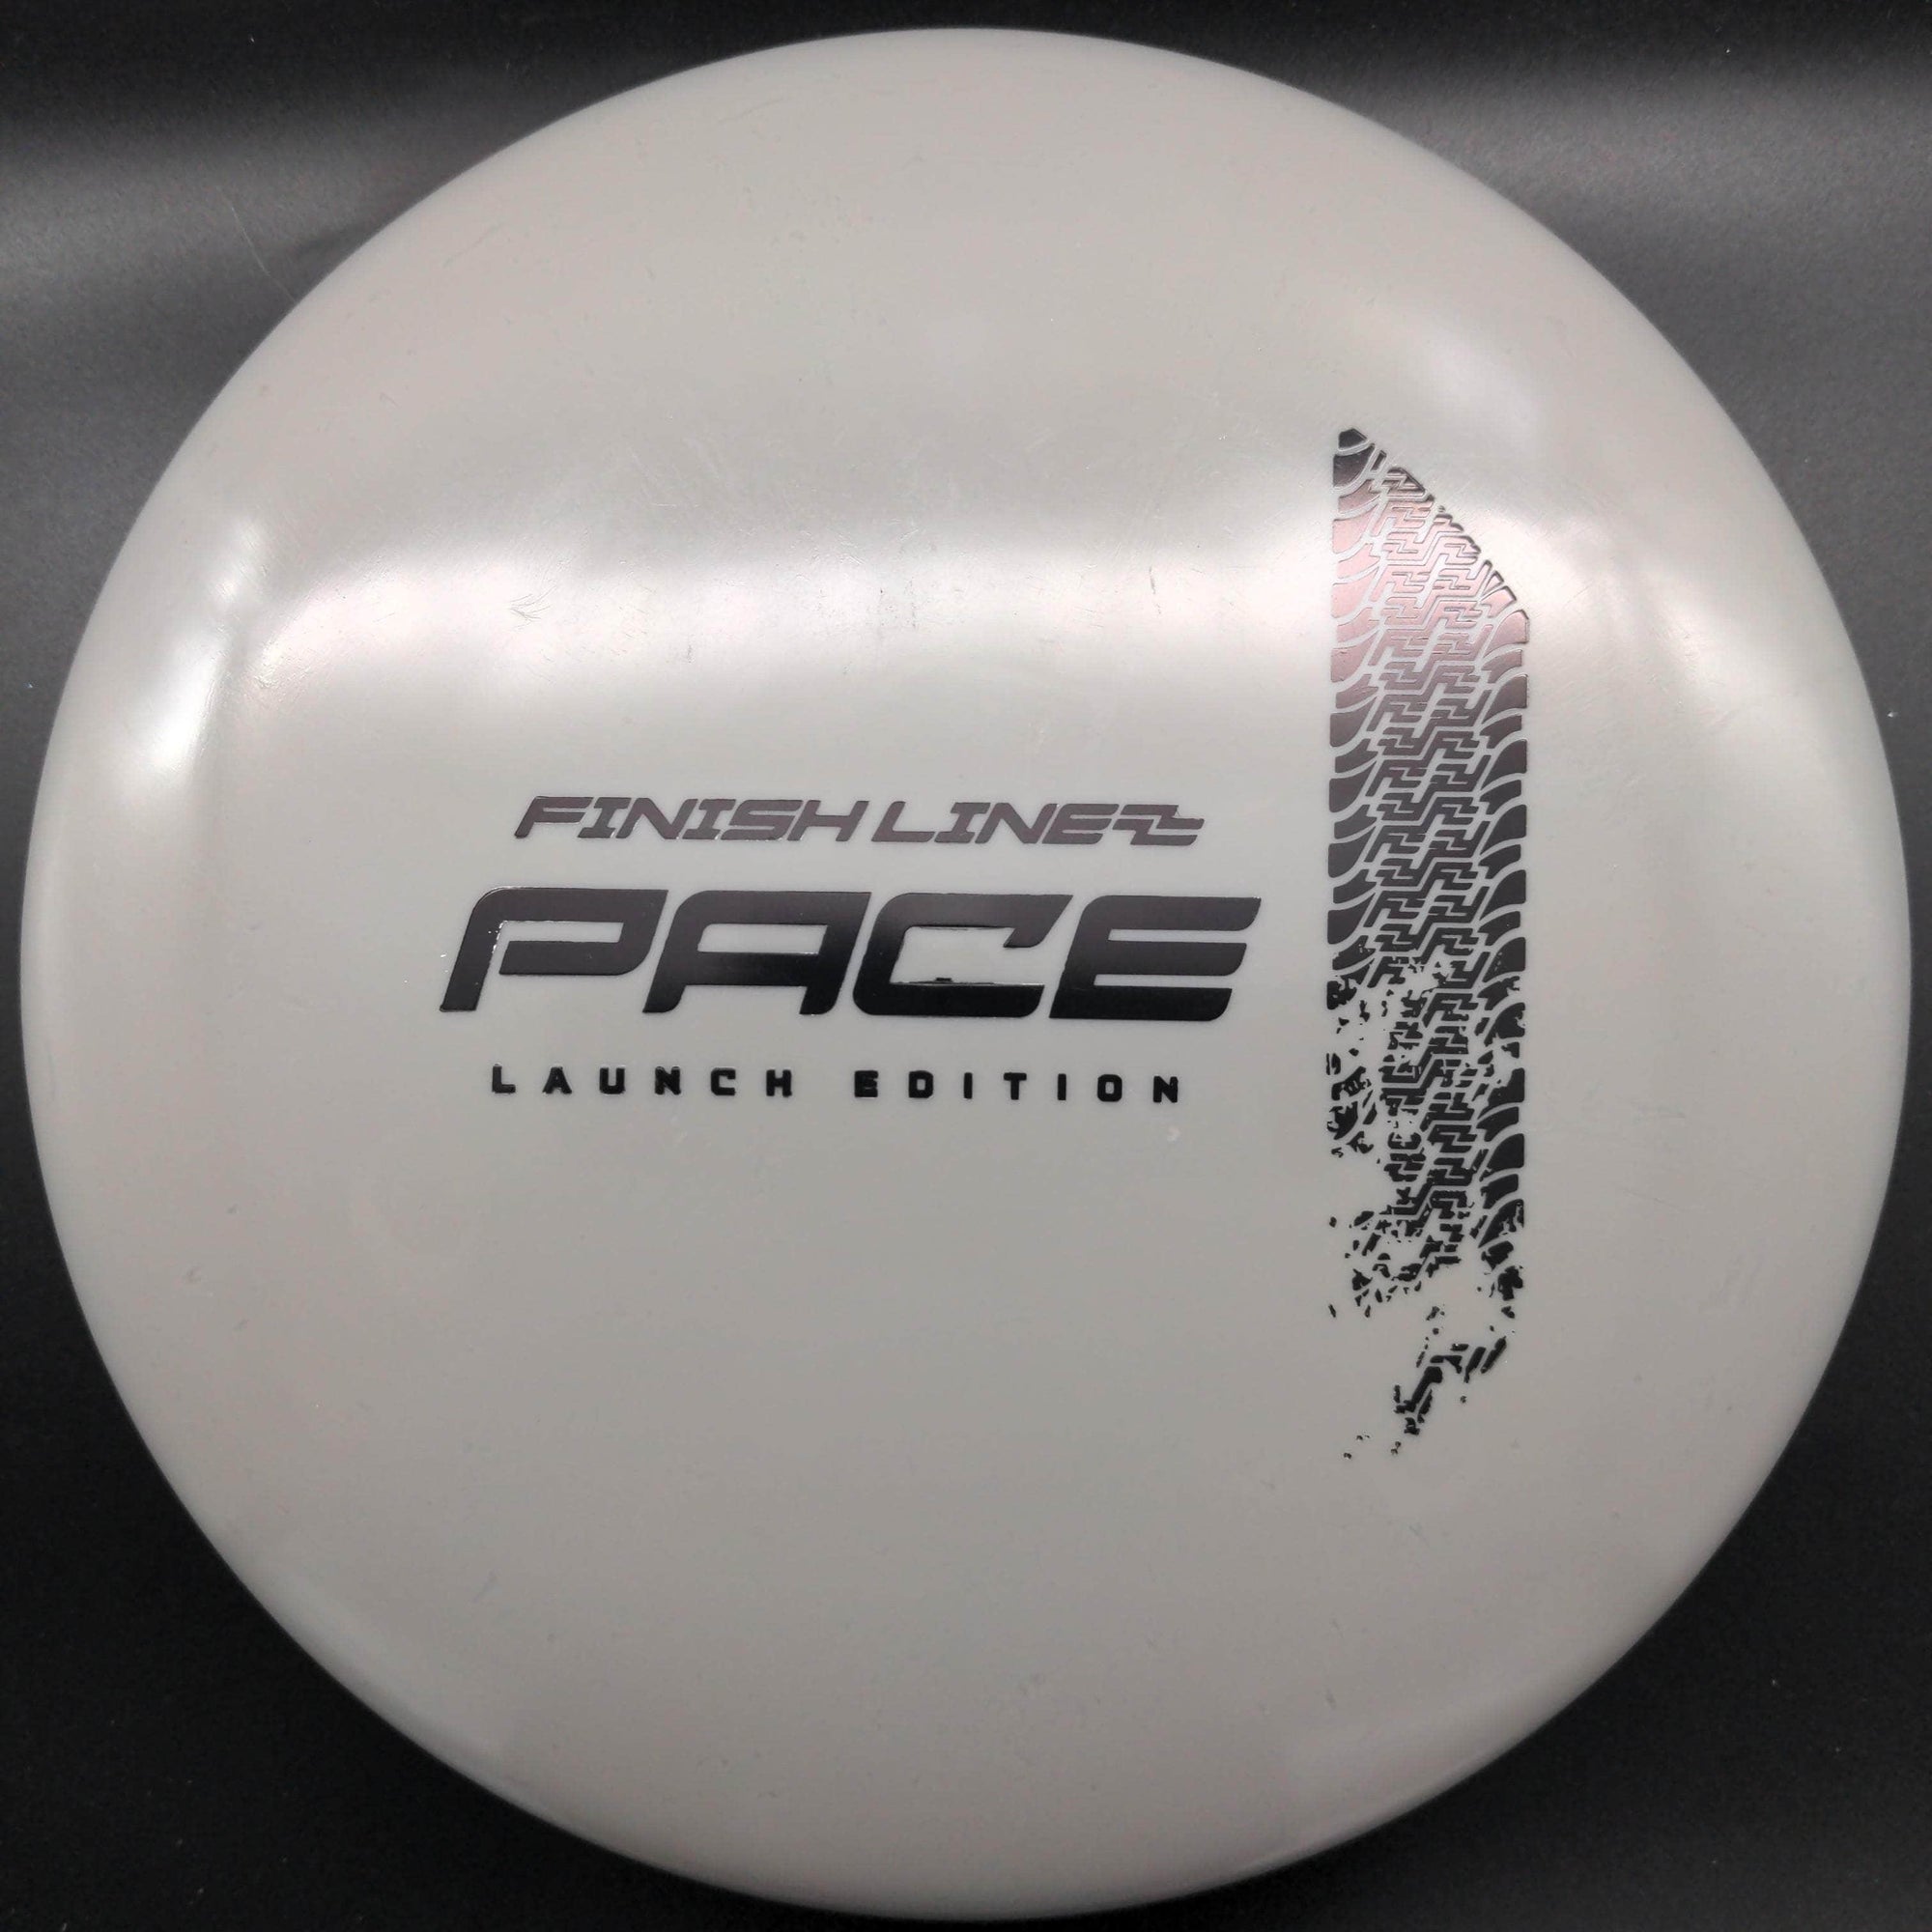 Infinite Discs Putter Grey Black Stamp 173g 2 Pace, Forged Plastic, Launch Edition